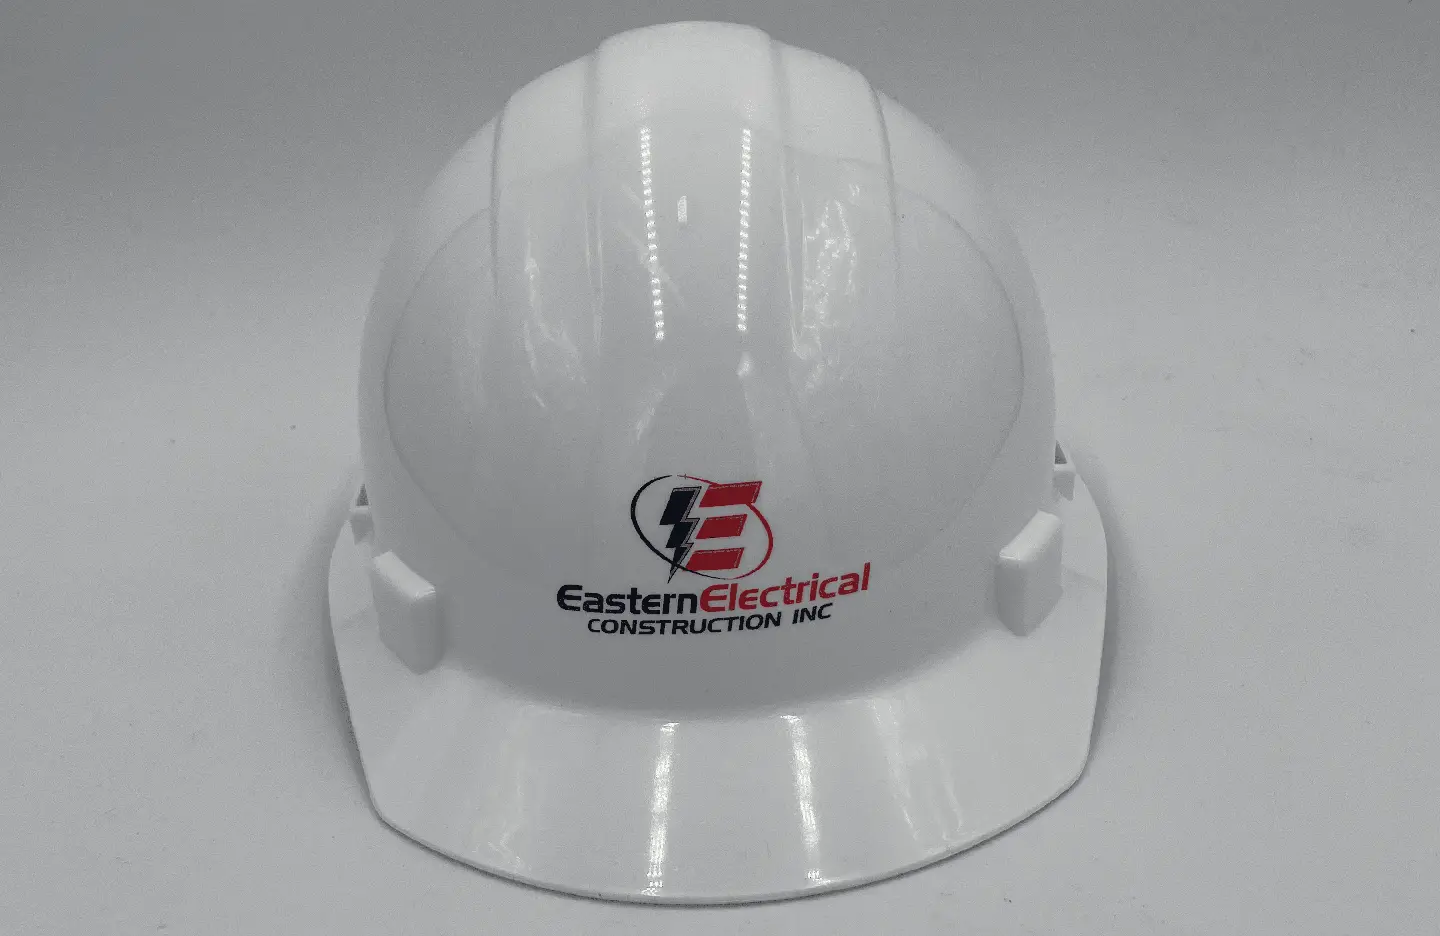 Custom-branded white hard hat for Eastern Electrical Construction Inc., featuring the company's logo. This personalized protective gear not only ensures safety on construction sites but also promotes the company's brand identity.